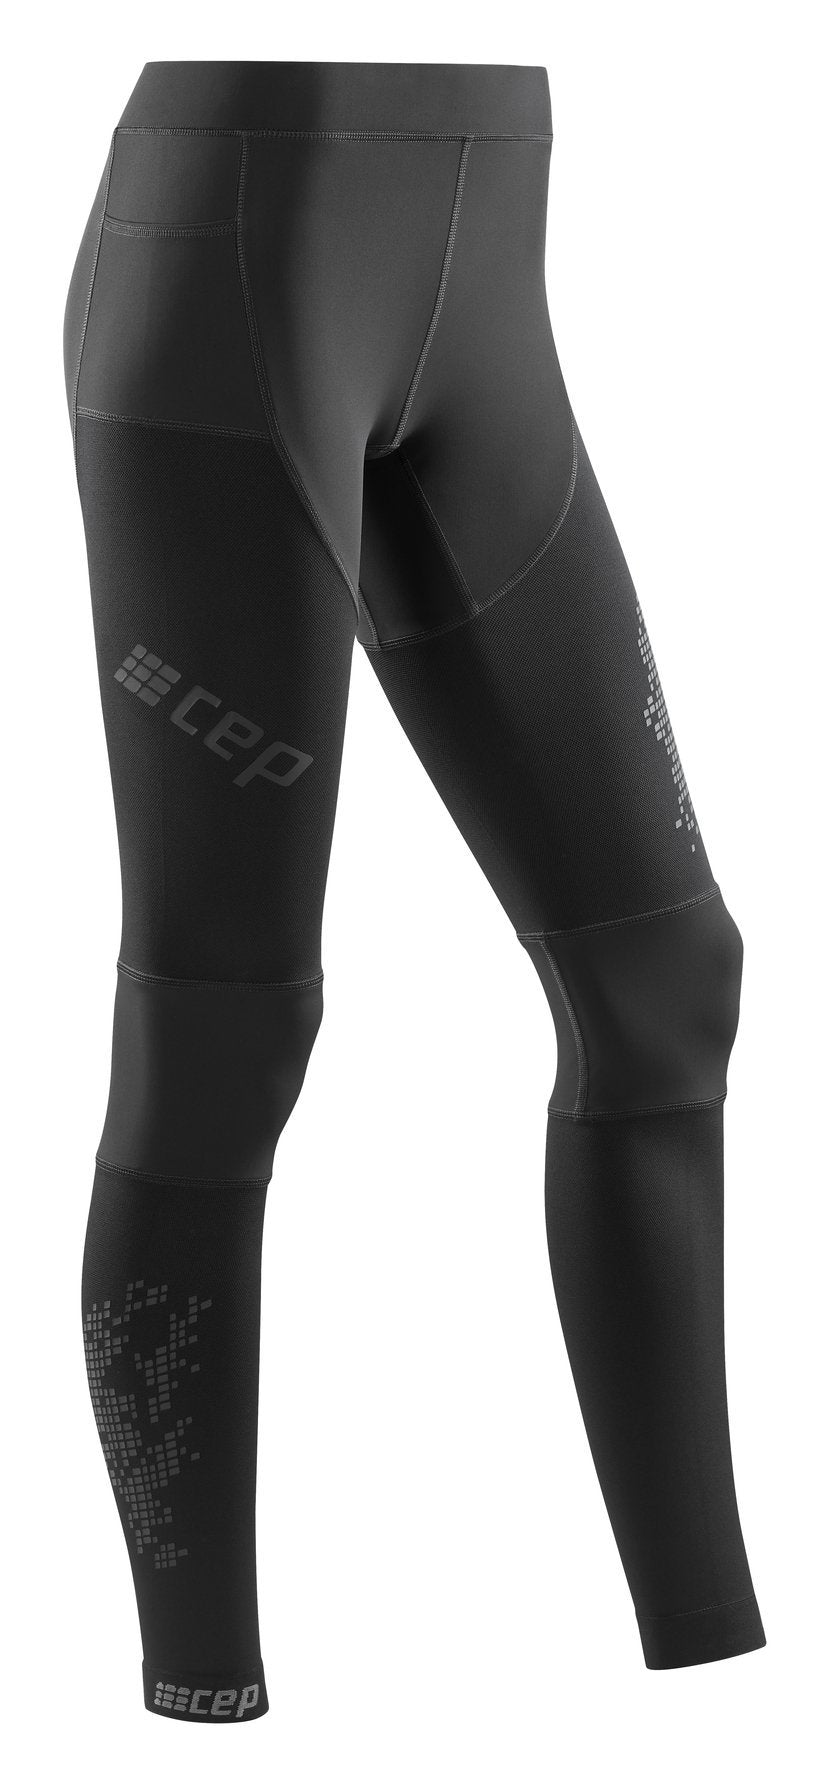 CEP Run Compression Tights 3.0 - Running tights Women's, Product Review